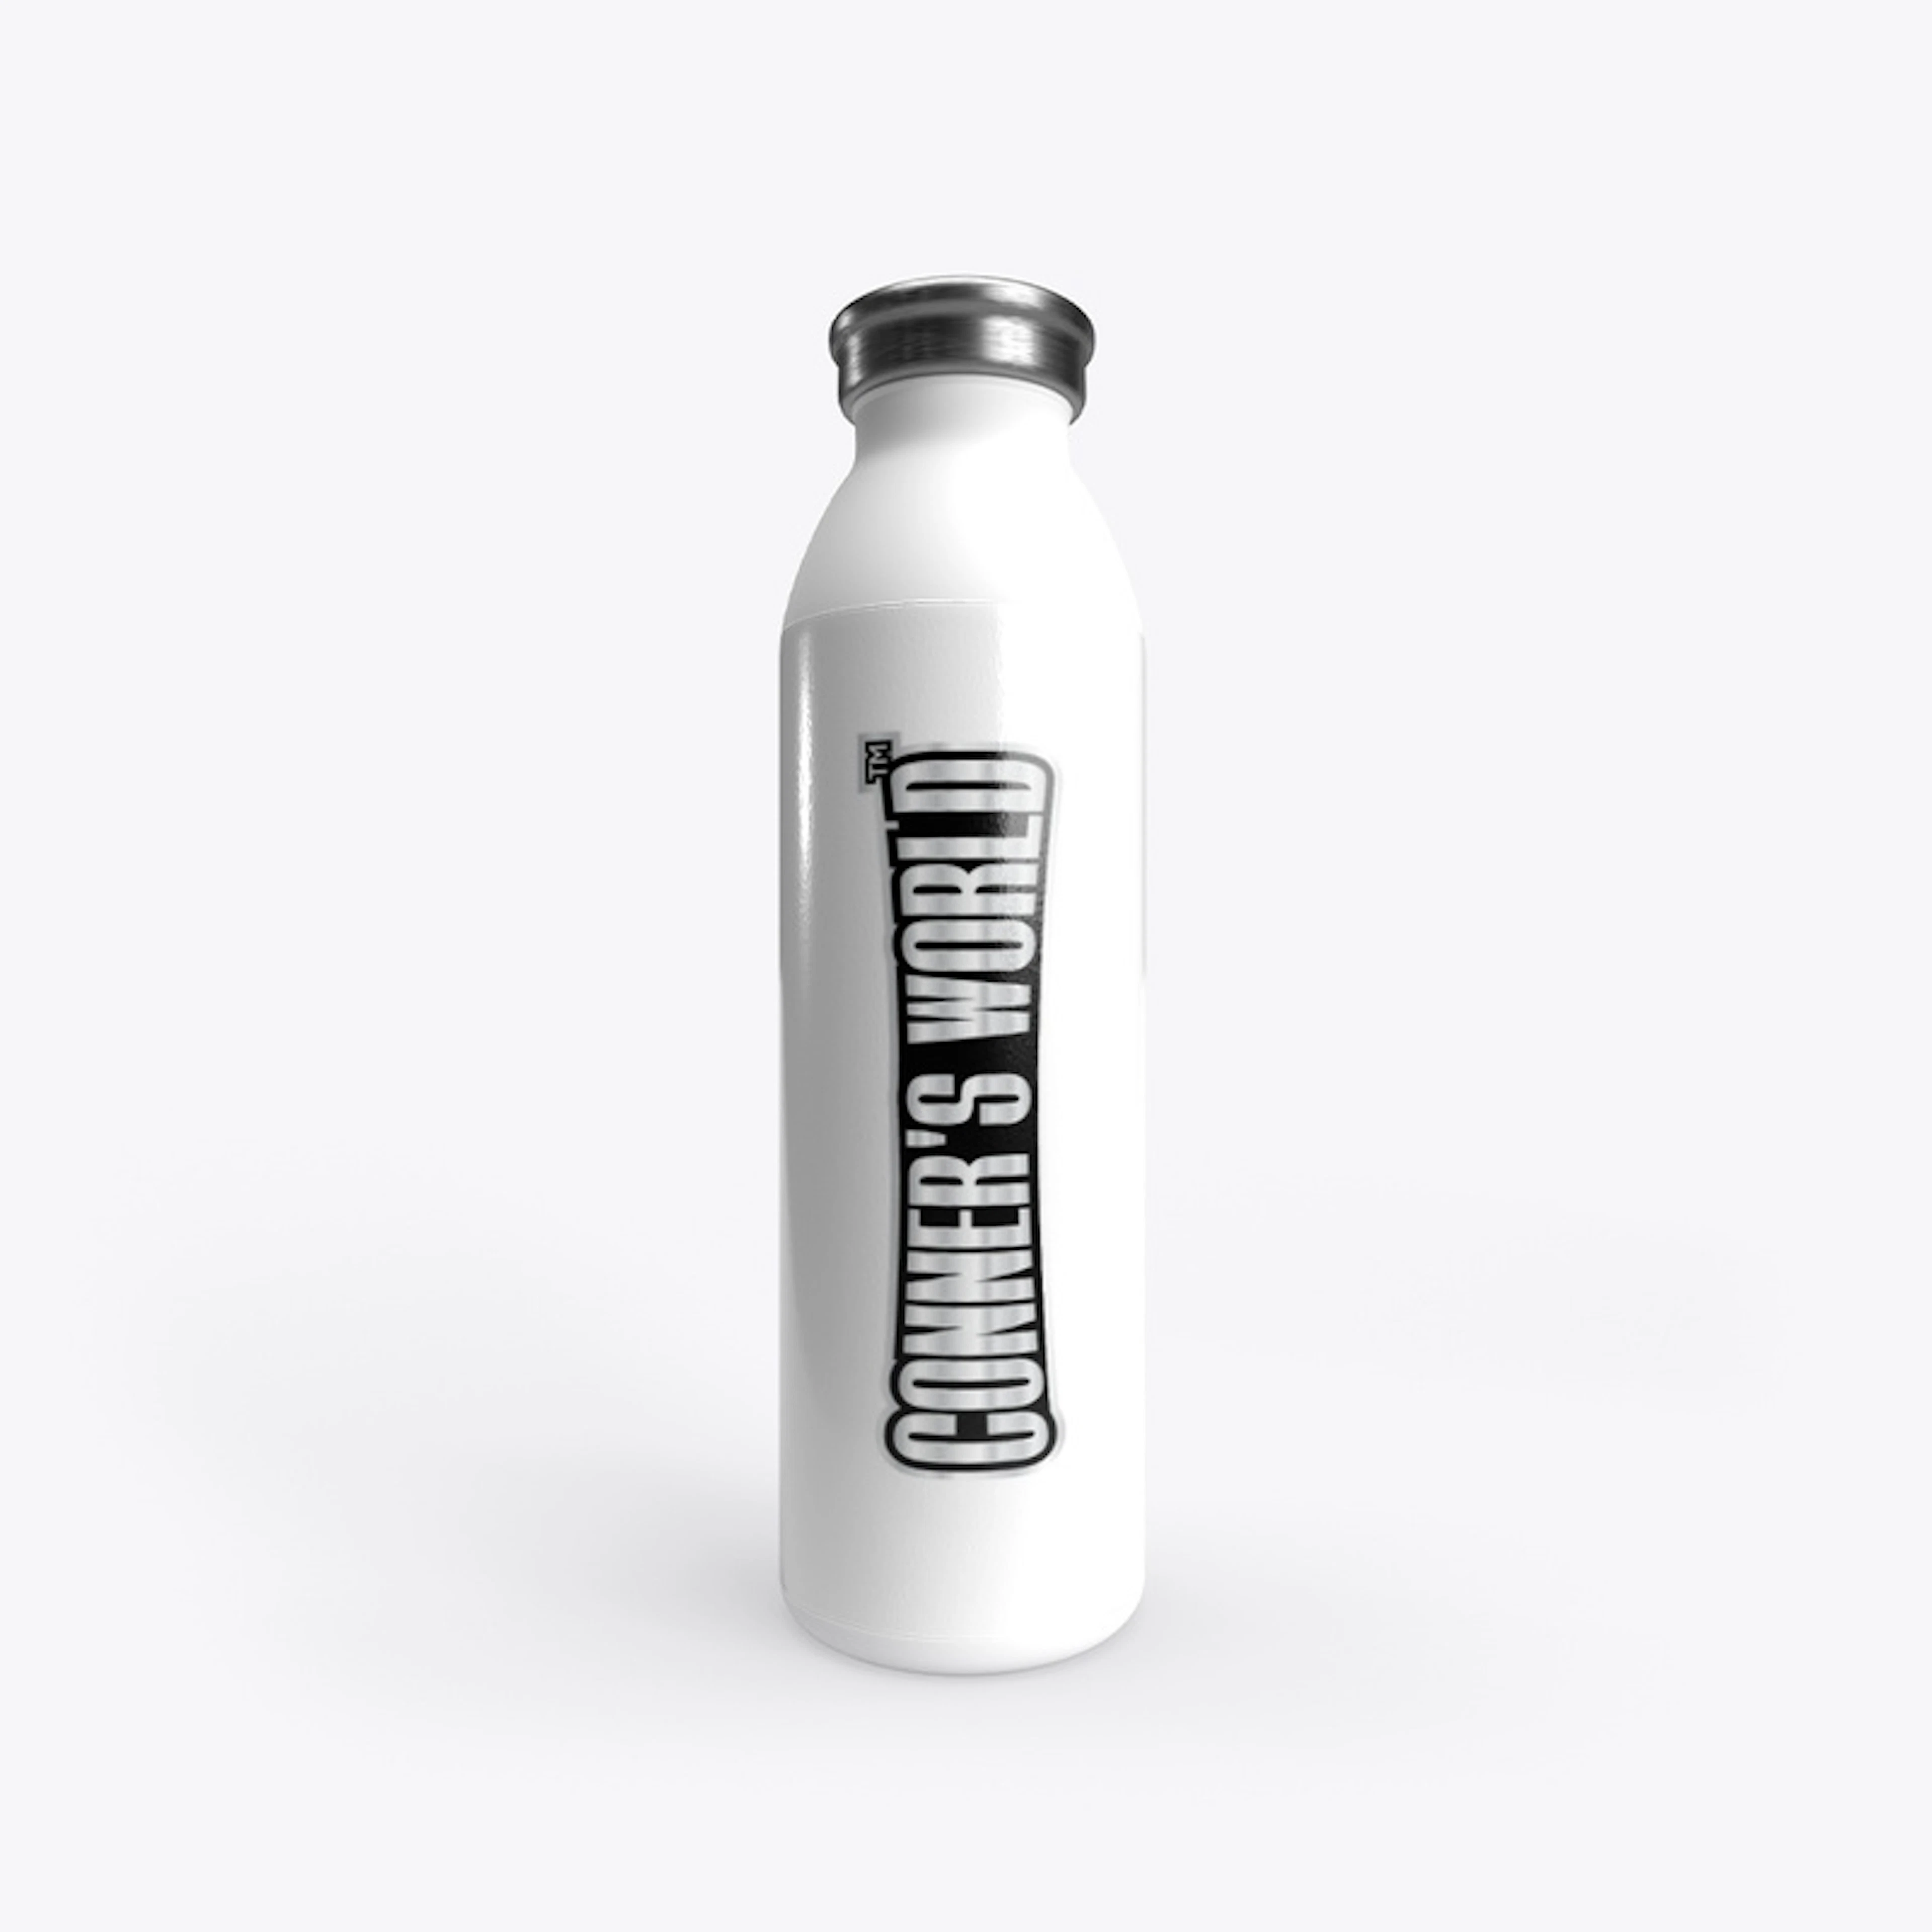 Official Conner's World Water Bottle